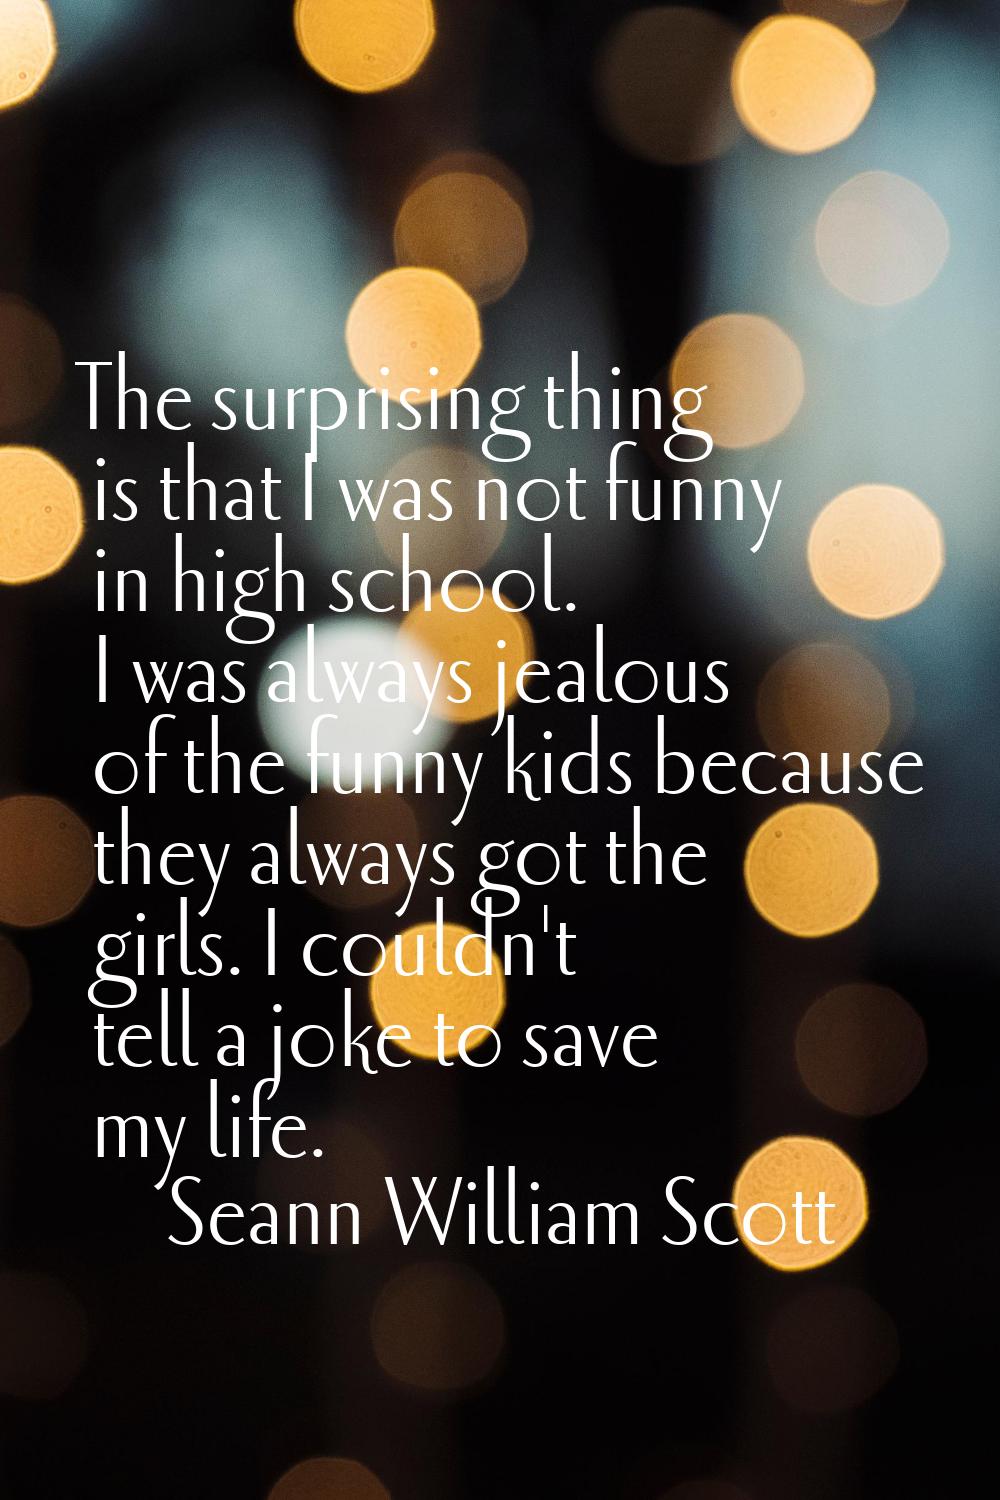 The surprising thing is that I was not funny in high school. I was always jealous of the funny kids